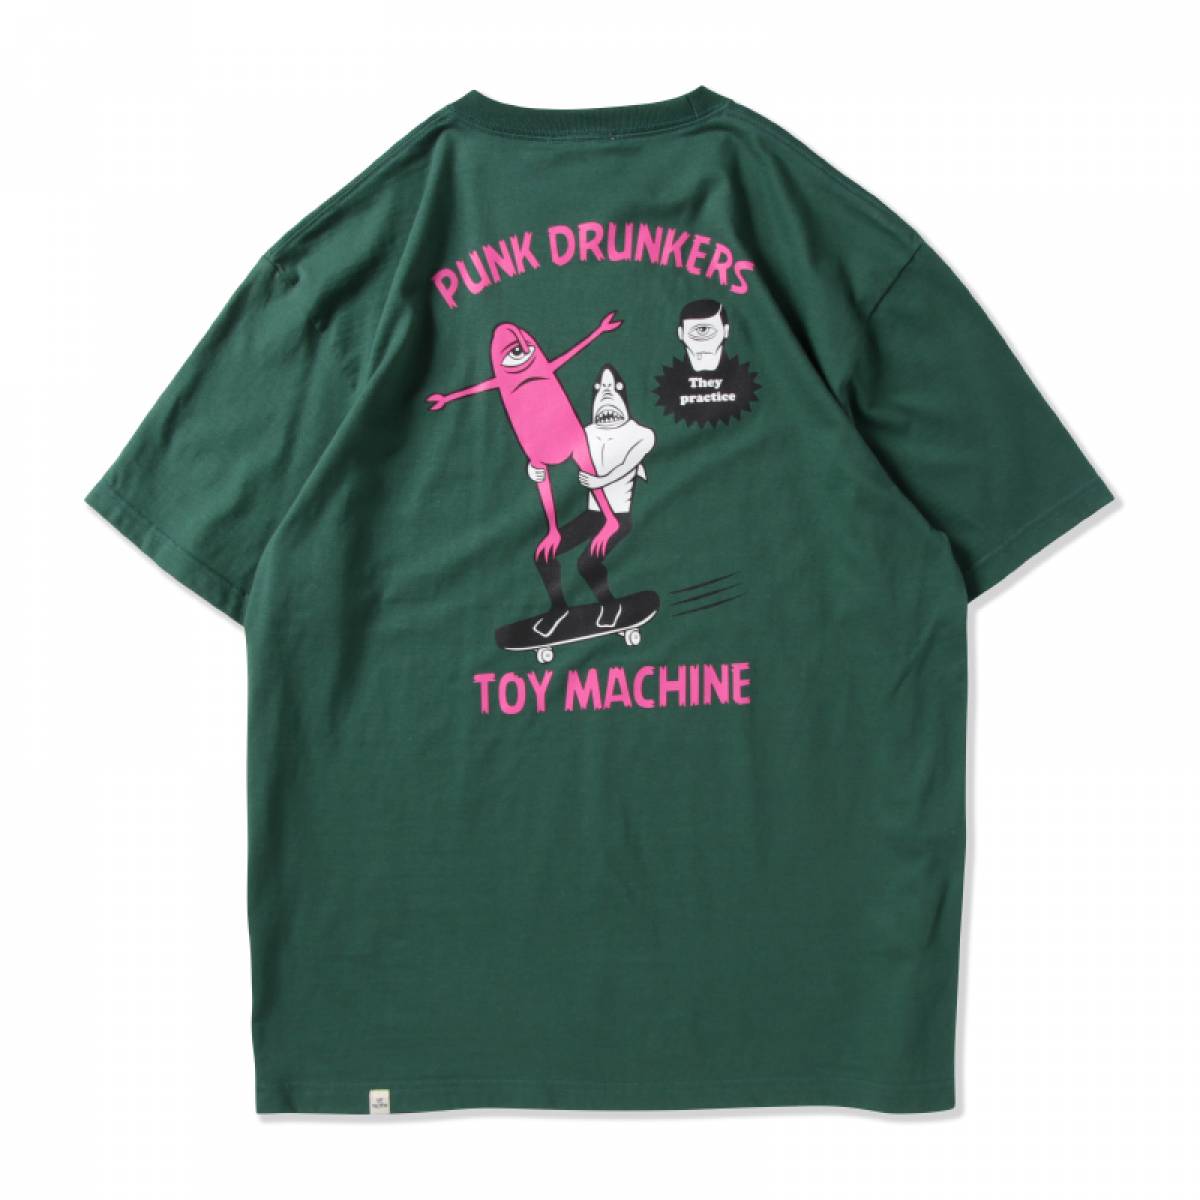 PUNK DRUNKERS × TOY MACHINE 組体操TEE - D.GREEN